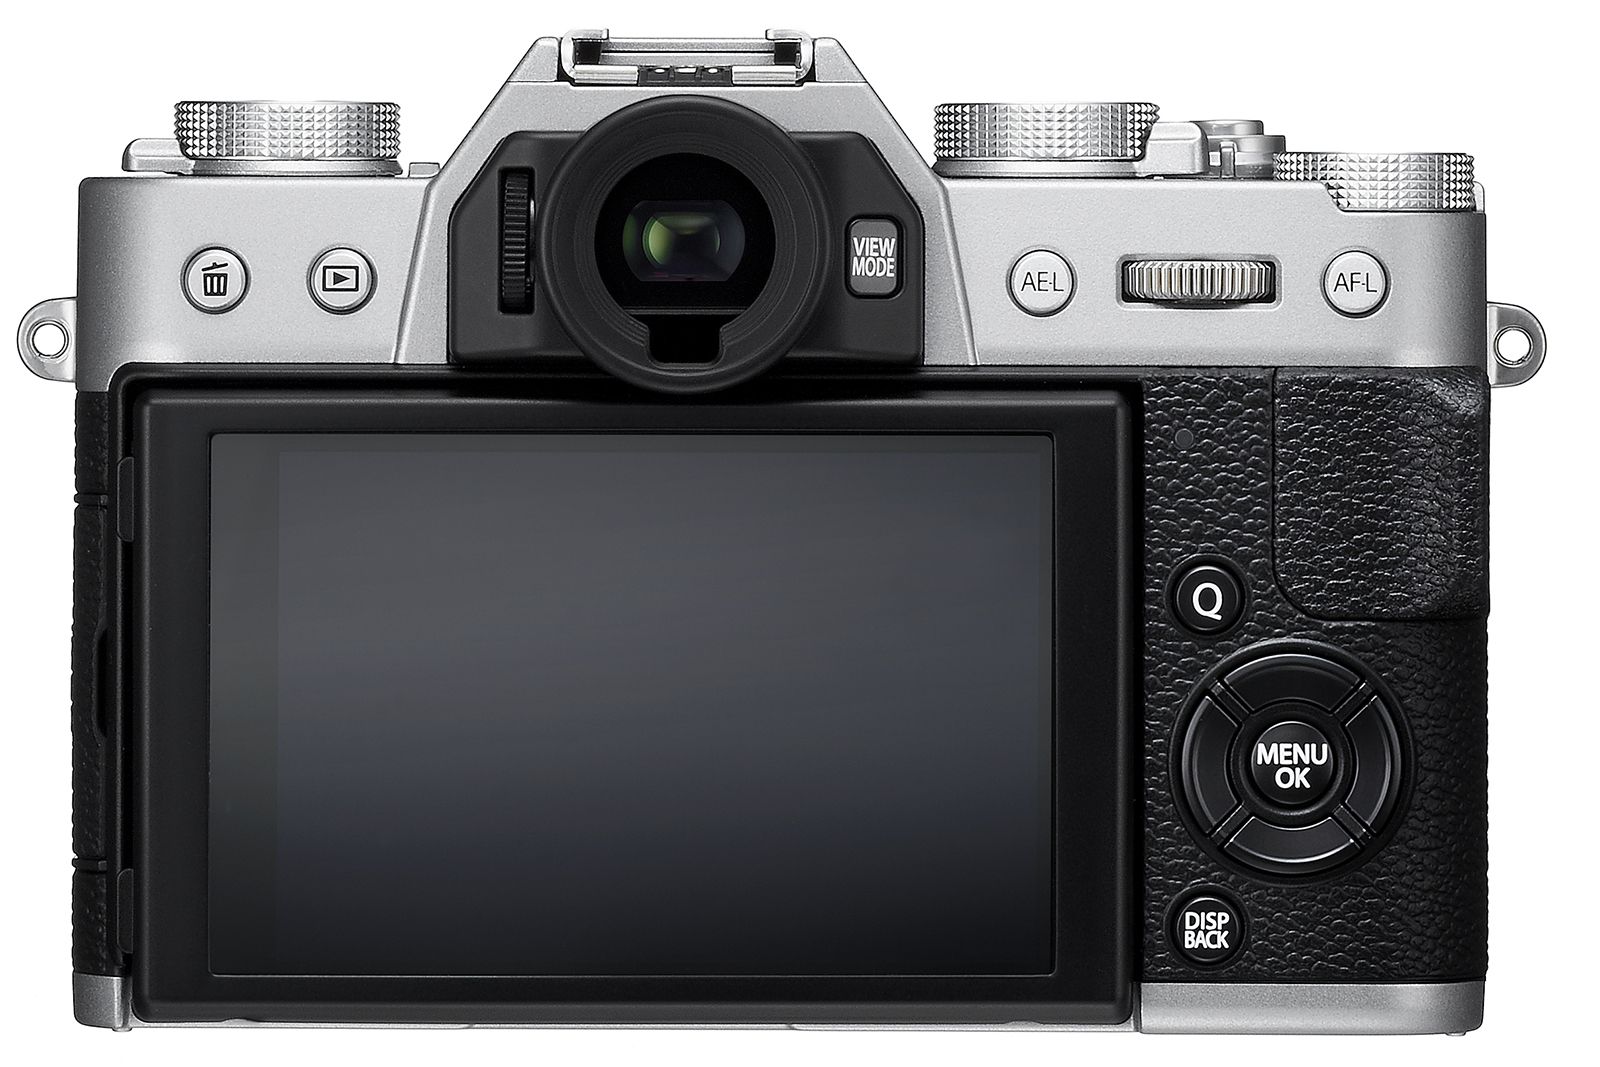 fujifilm x t20 ups resolution adds touchscreen to mid level system camera image 2